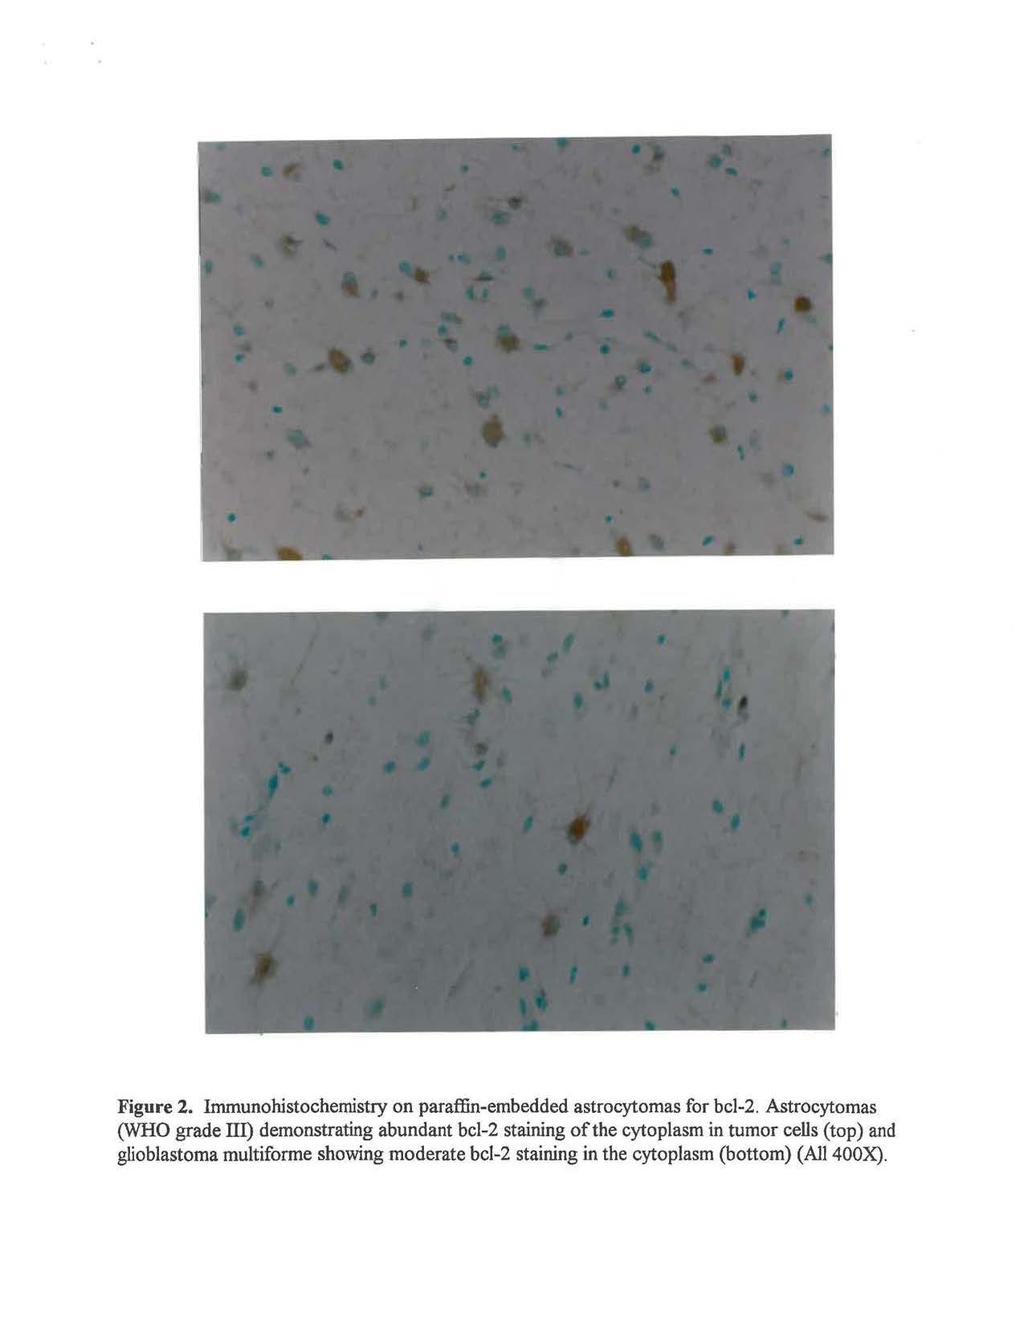 Figure 2. Immunohistochemistry on paraffin-embedded astrocytomas for bcl-2.